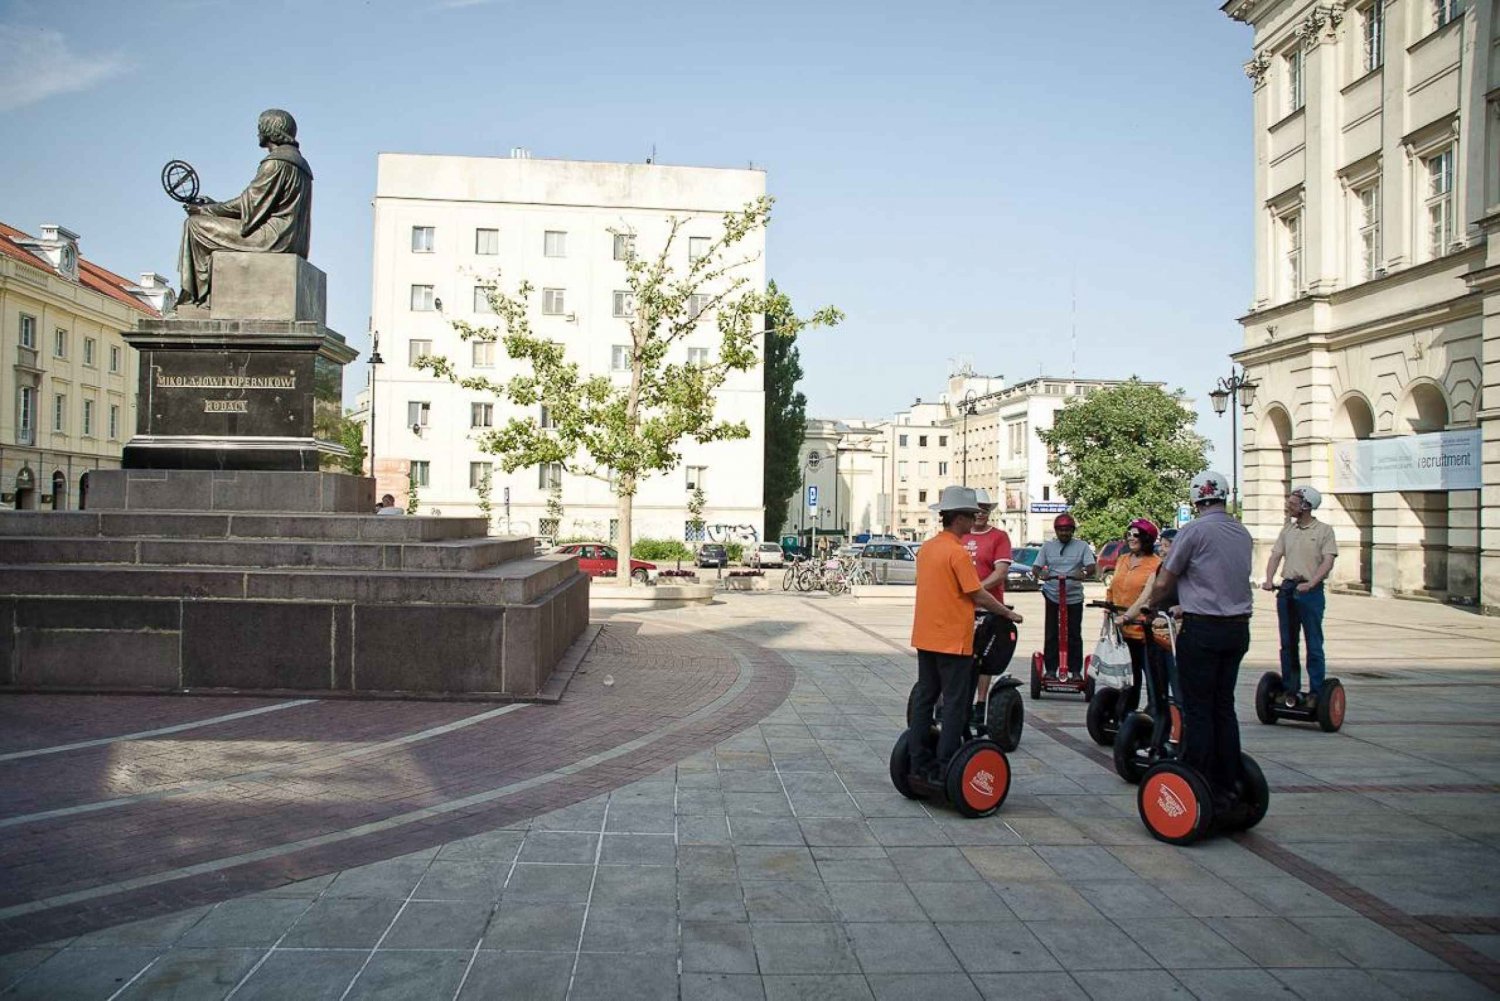 Warsaw: 3-Hour Guided City Highlights Tour by Segway